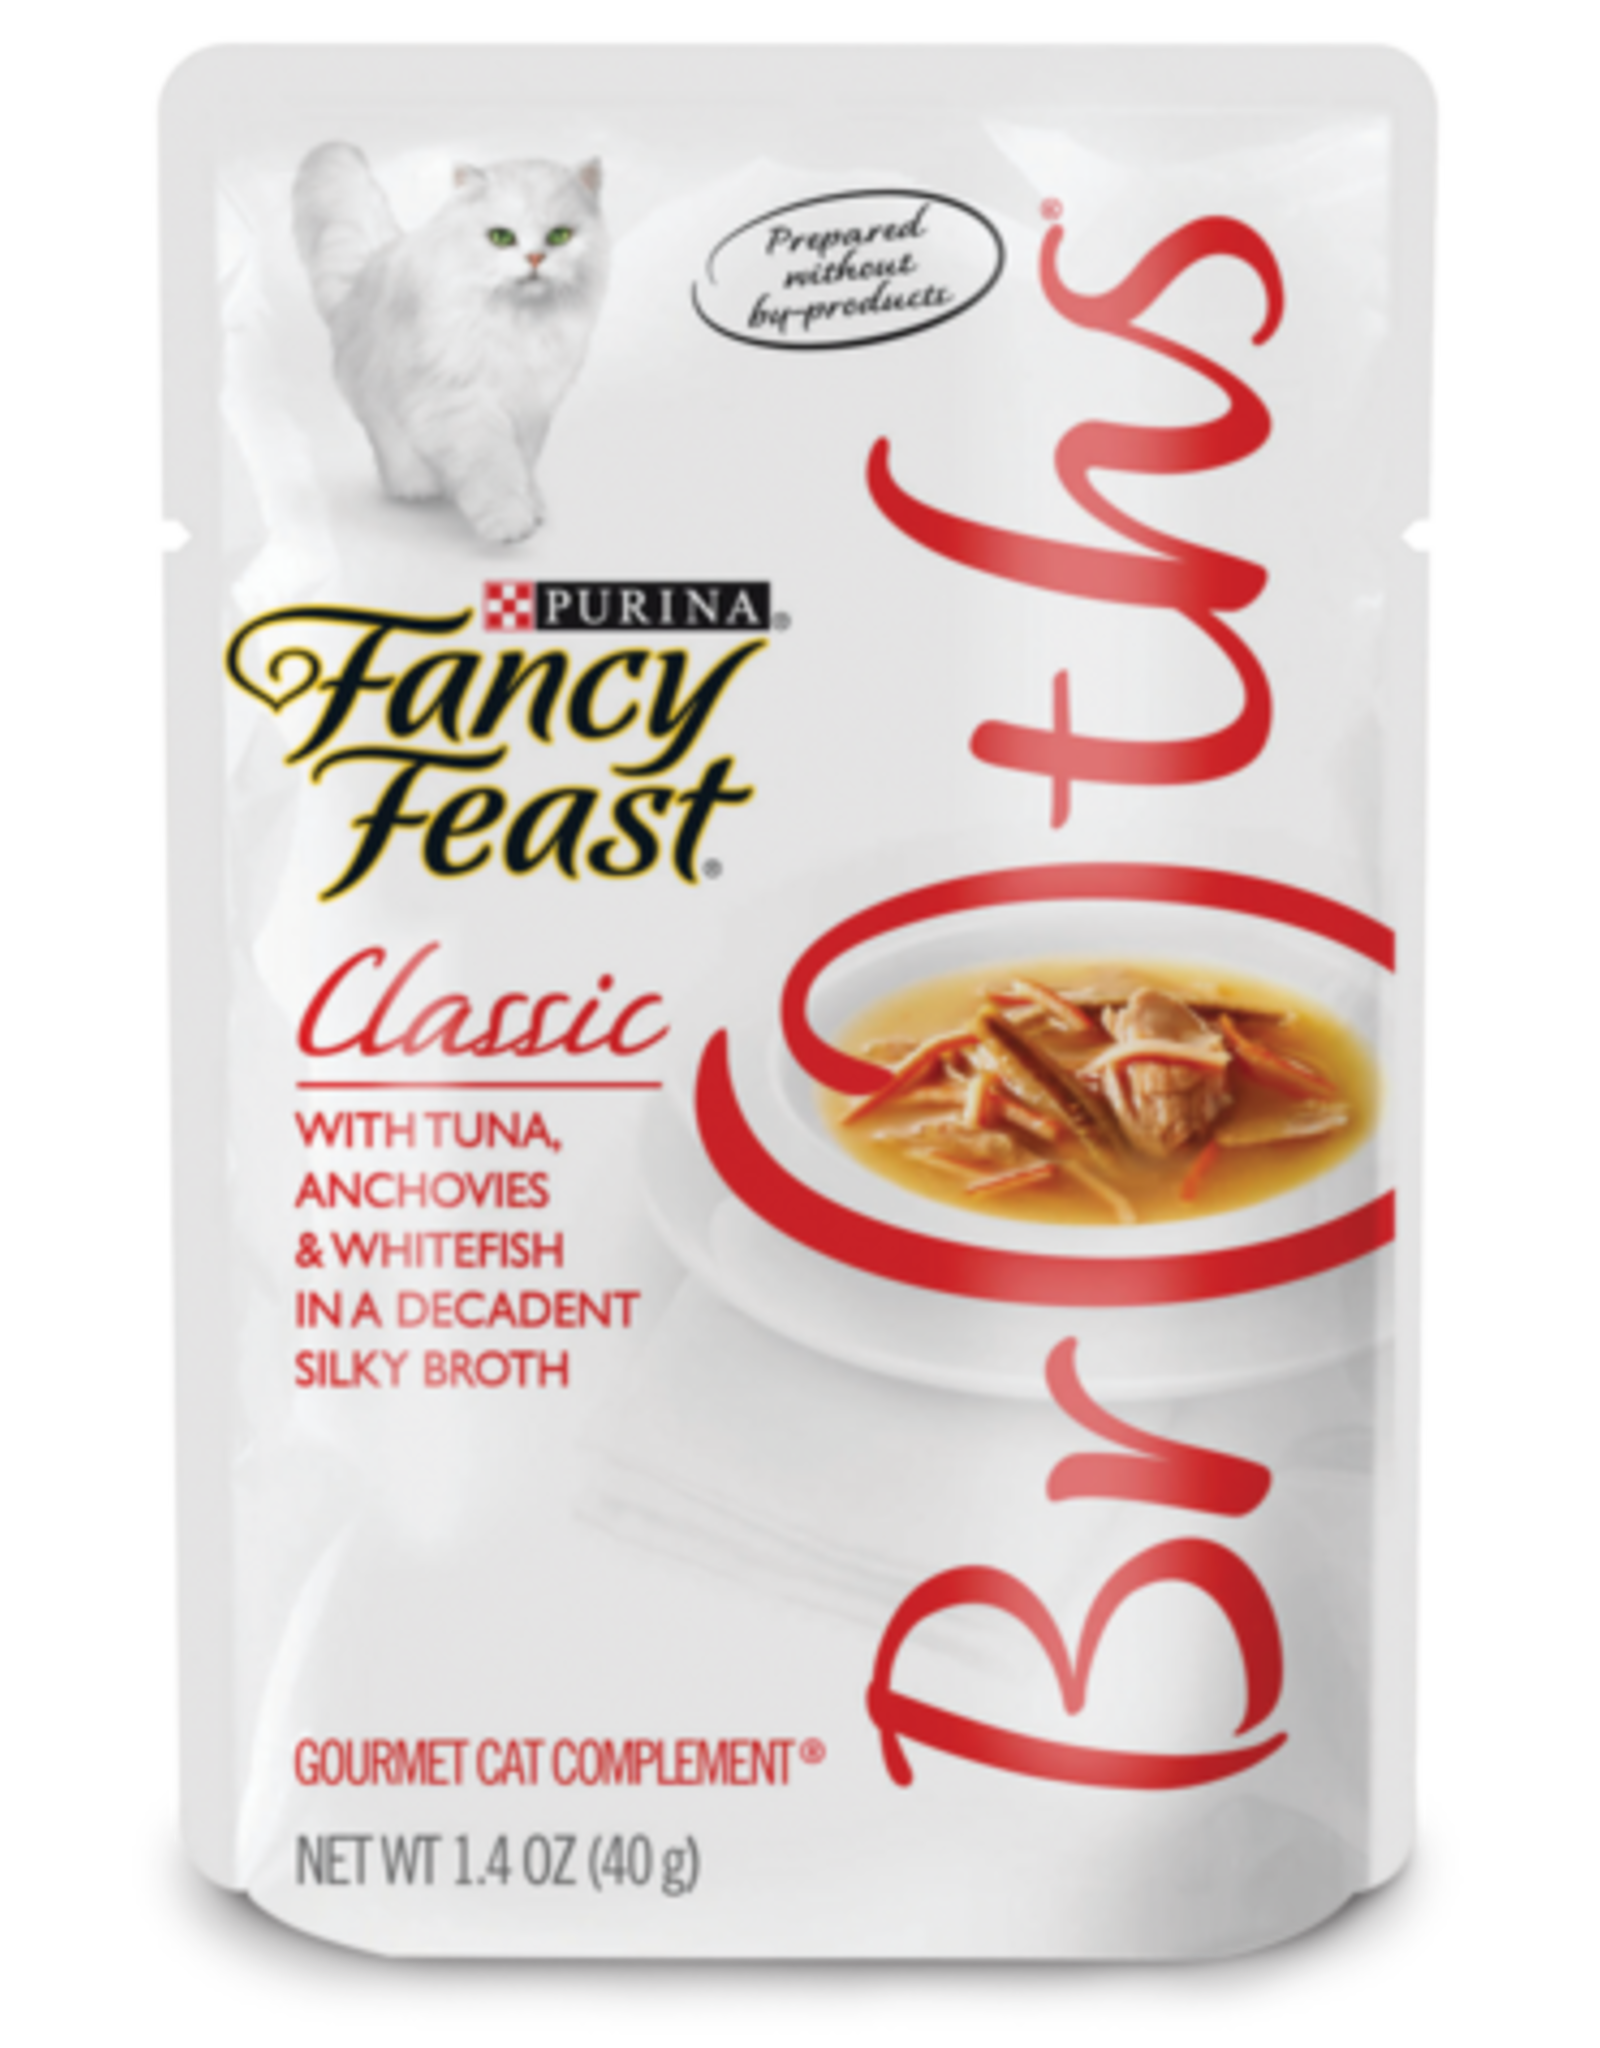 NESTLE PURINA PETCARE FANCY FEAST CLASSIC BROTHS TUNA ANCHOVIES & WHITEFISH 1.4OZ CASE OF 16